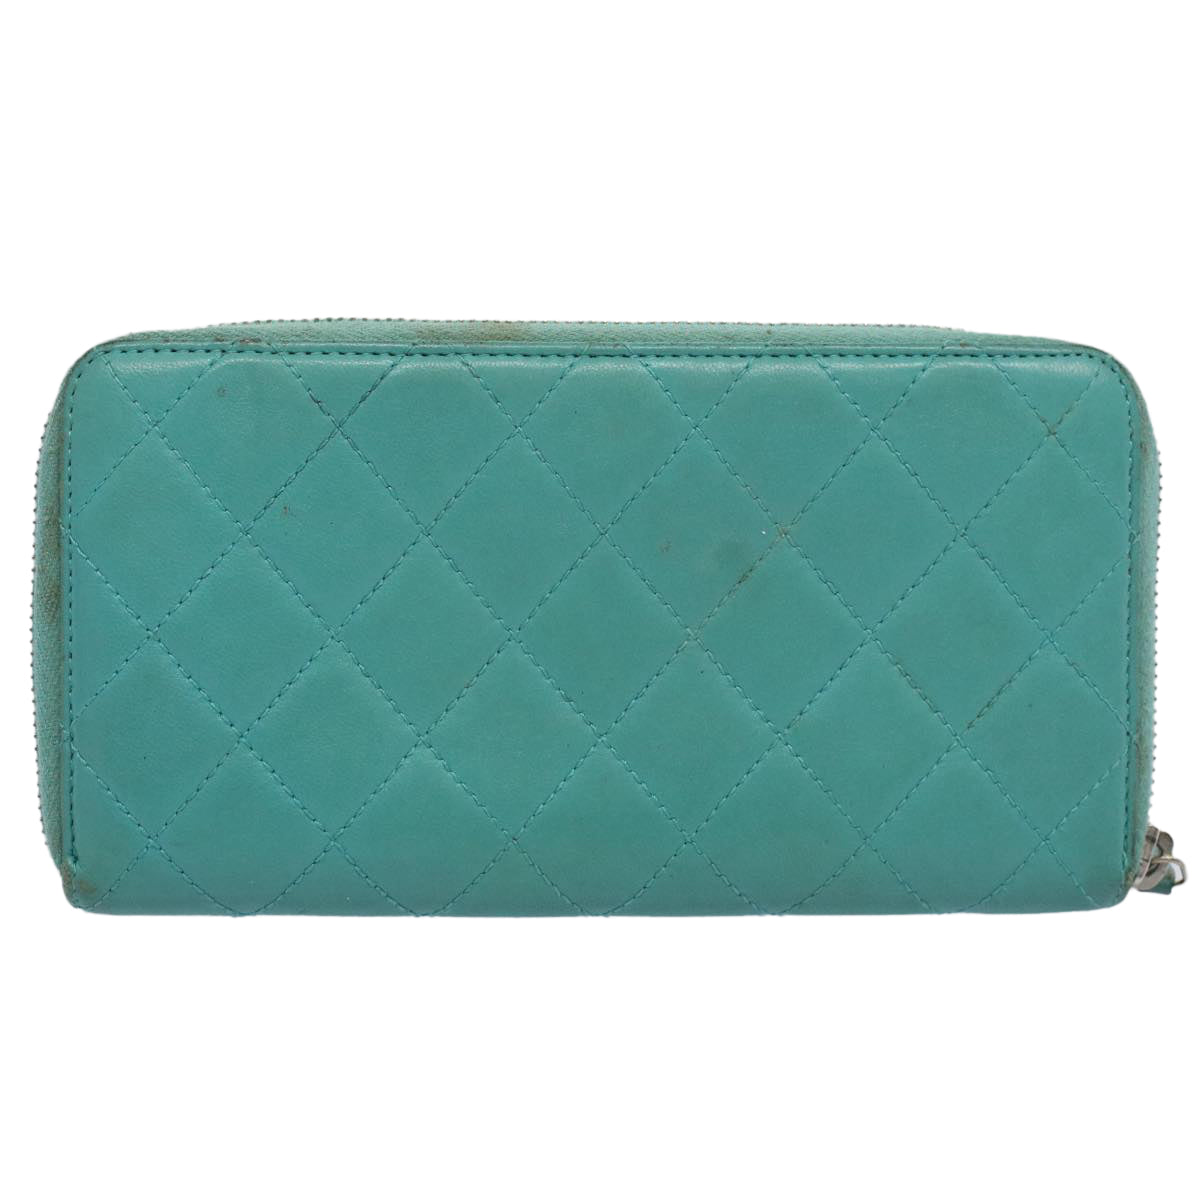 CHANEL Matelasse Wallet Lamb Skin Turquoise Blue CC Auth bs9740 - 0